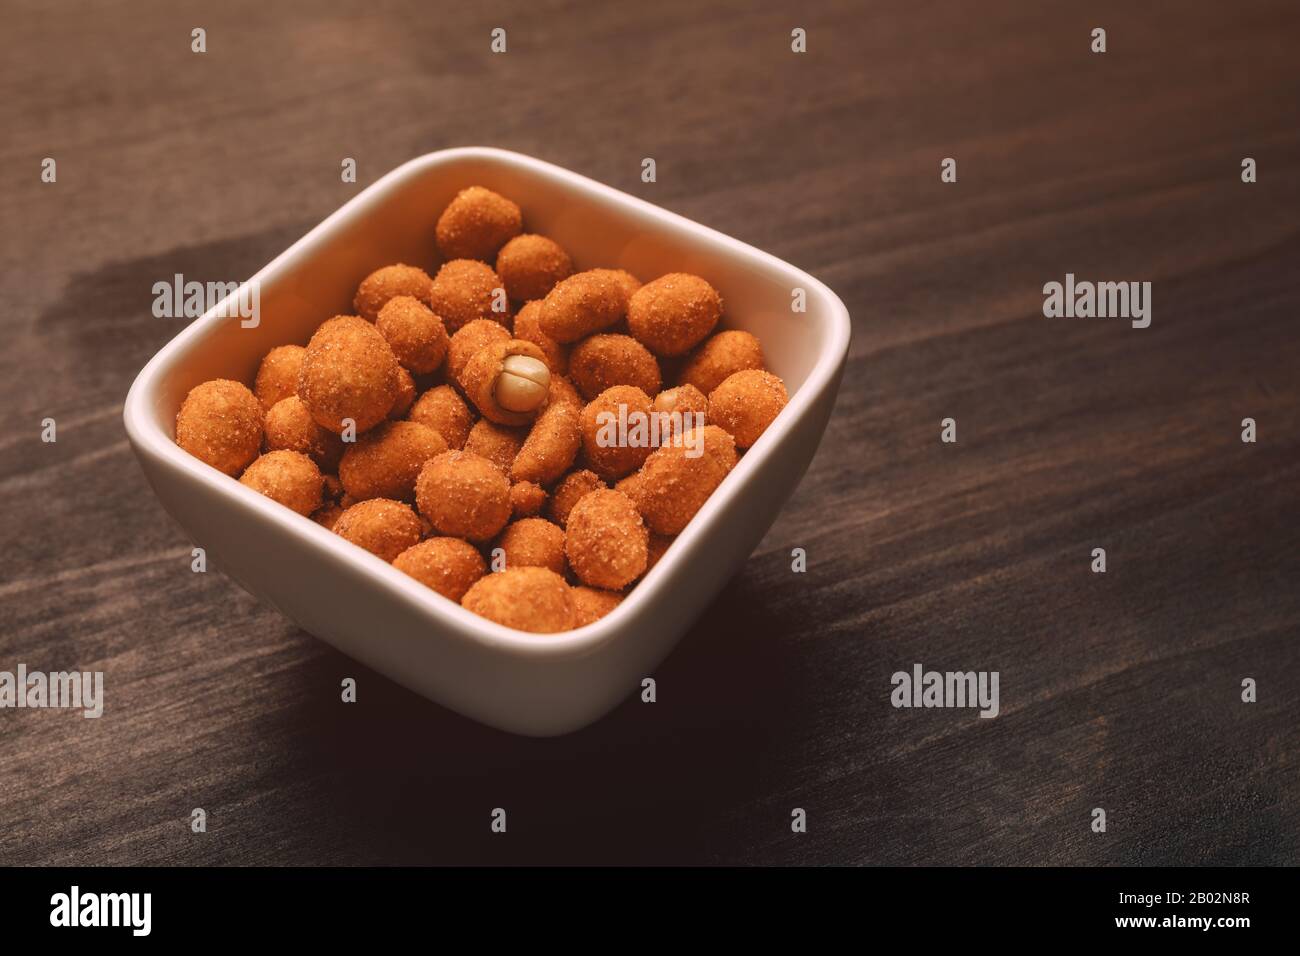 Salty peanut snack coated with barbecue sauce served in ceramic bowl on table Stock Photo